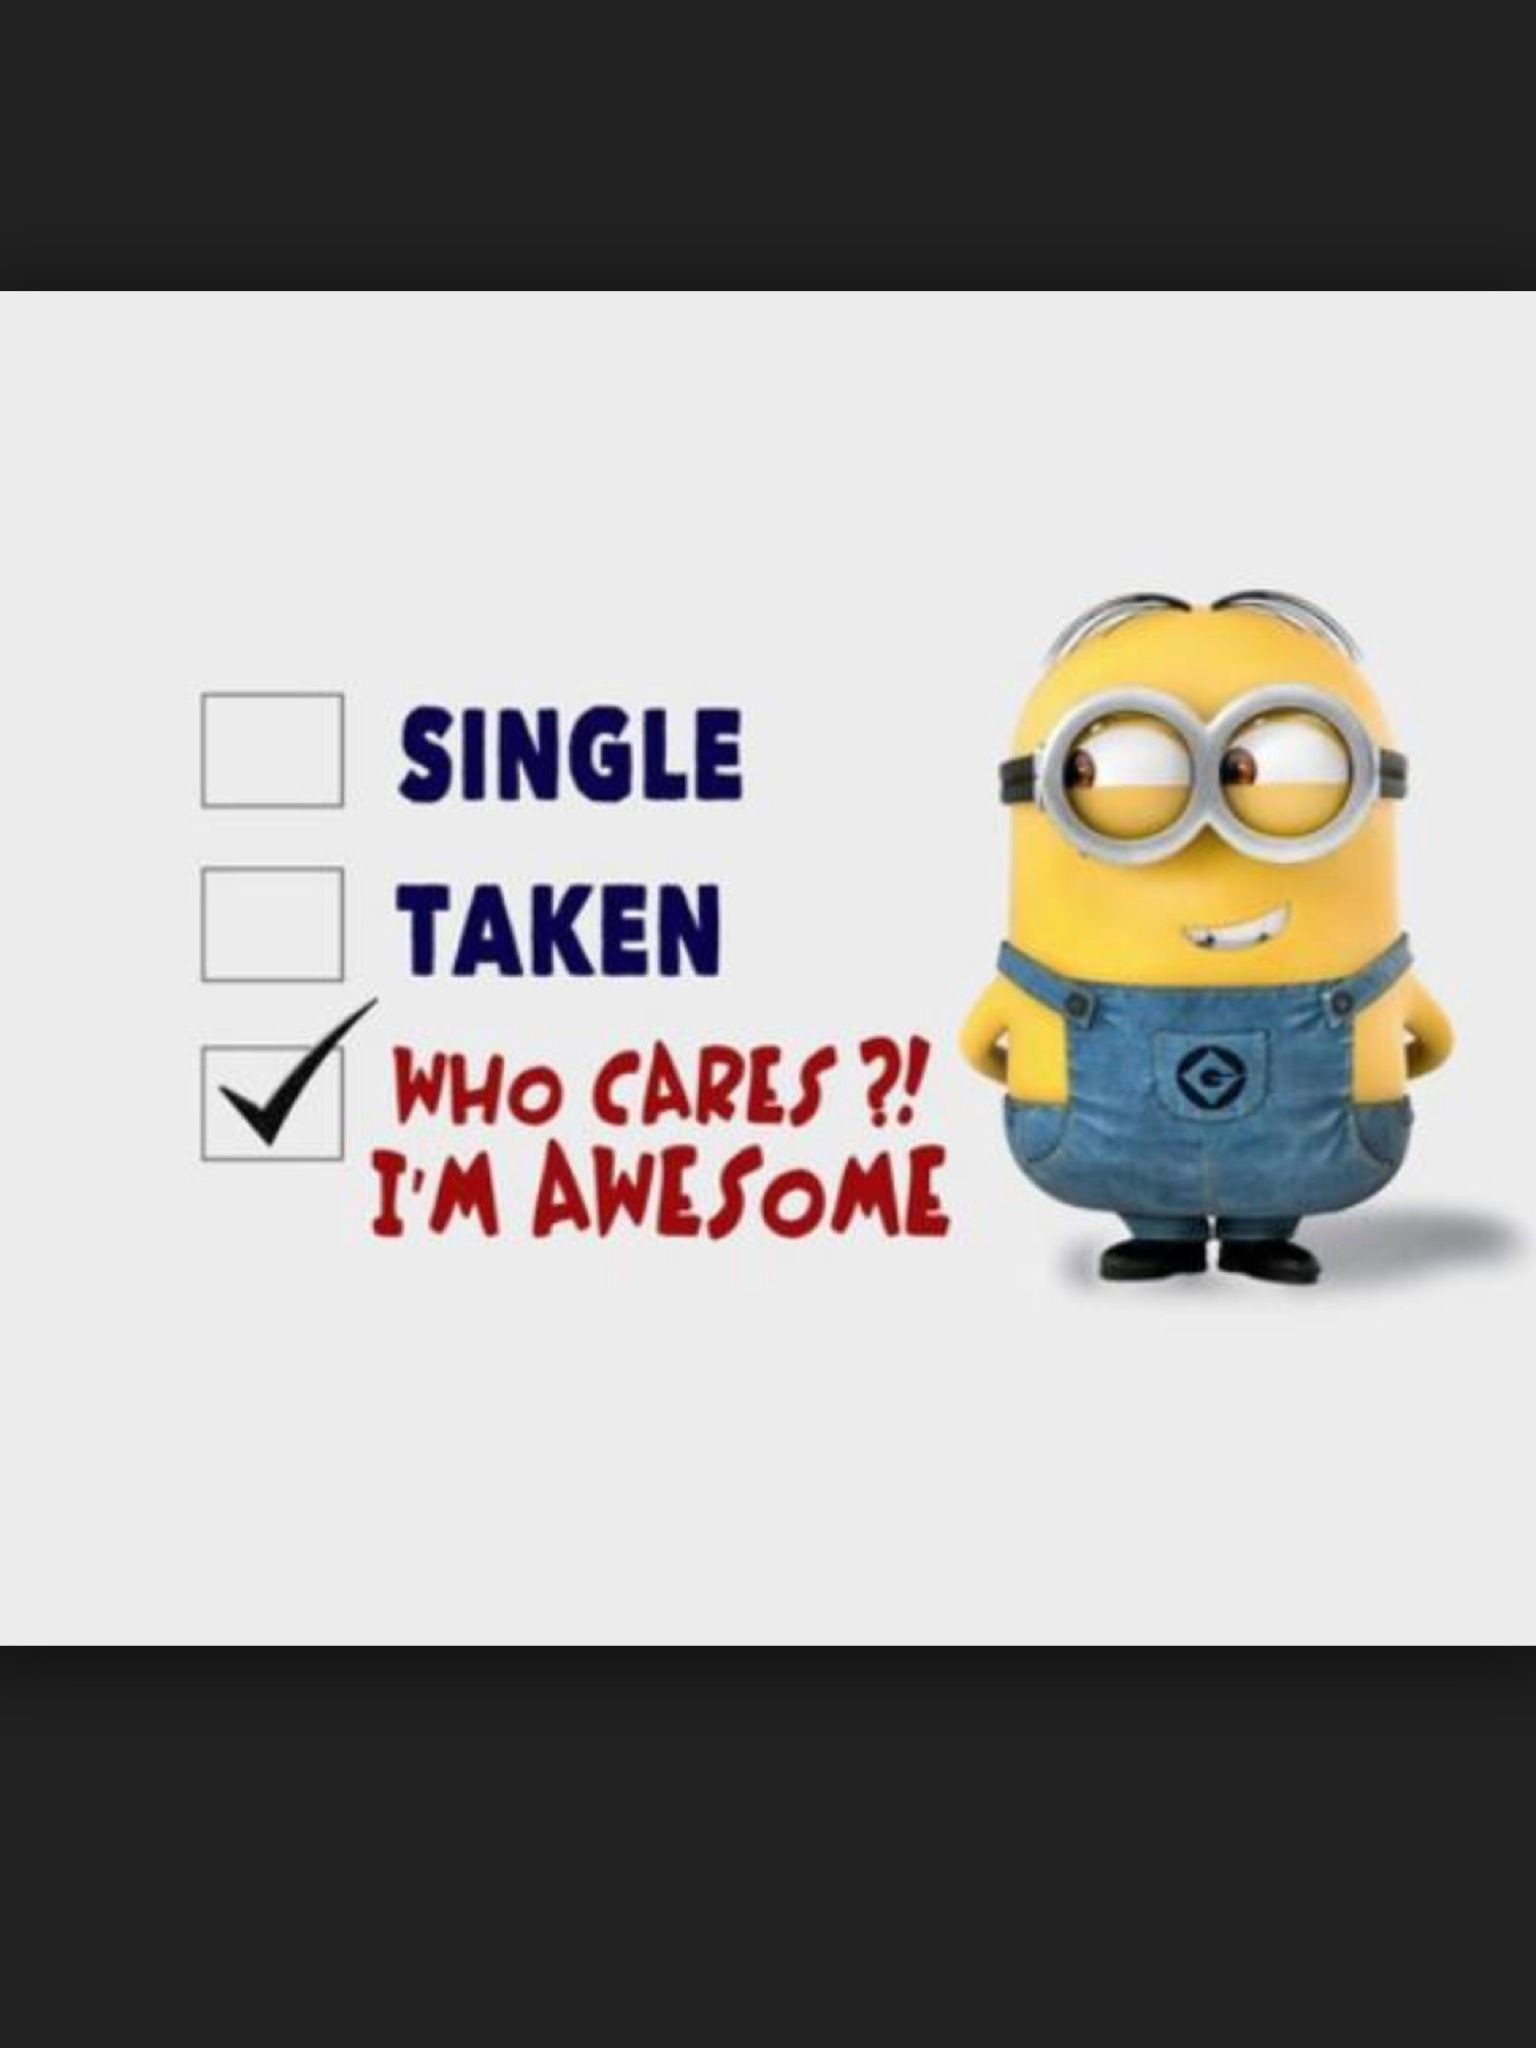 1536x2048 Discovered on Monogram App I'm Awesome, Awesome Things, Minion Photos, Funny